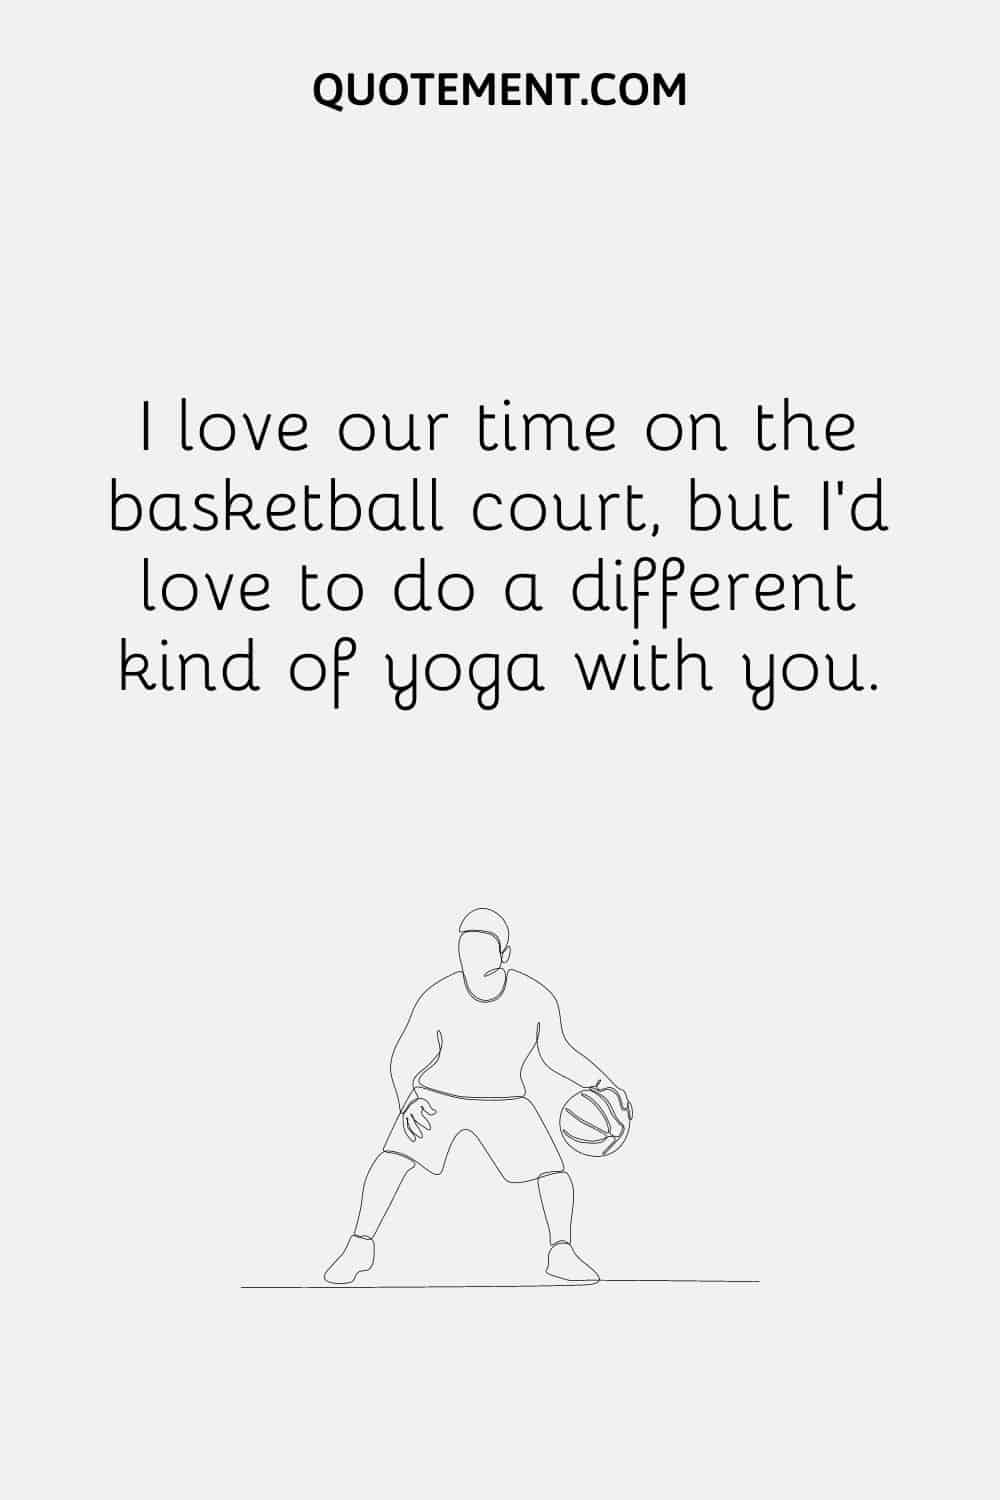 I love our time on the basketball court, but I’d love to do a different kind of yoga with you